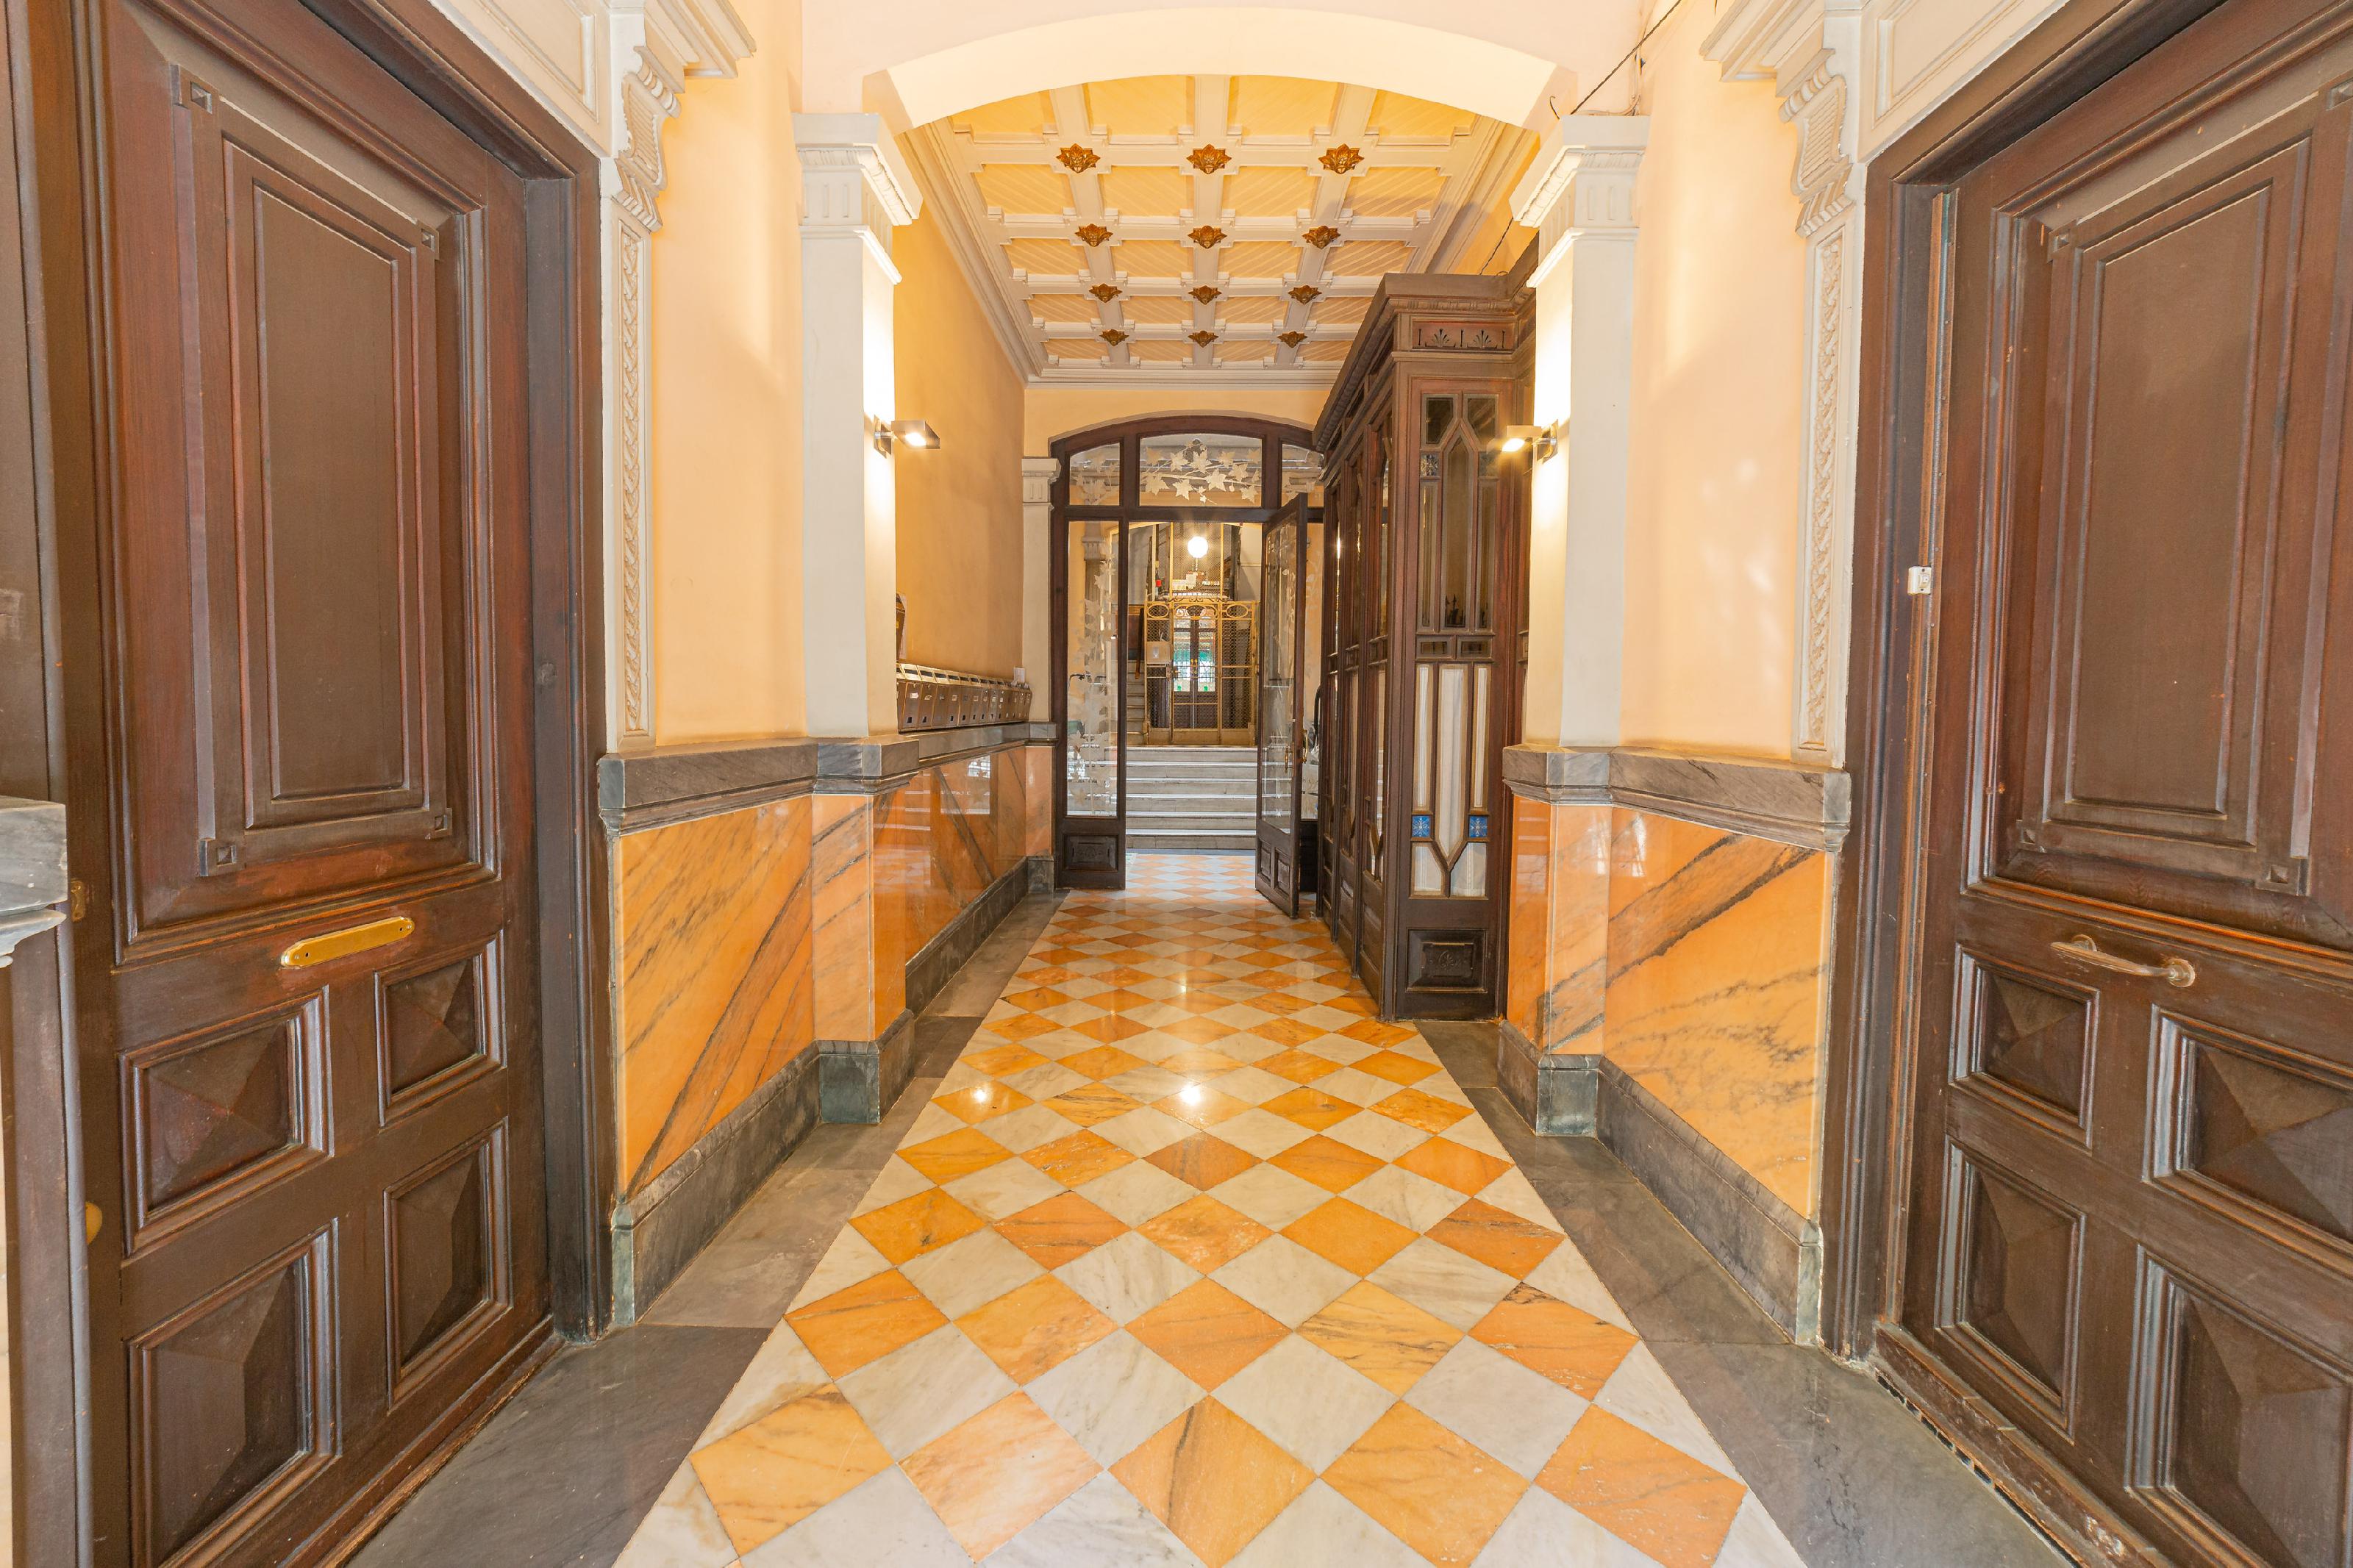 273416 Flat for sale in Eixample, Old Esquerre Eixample 5